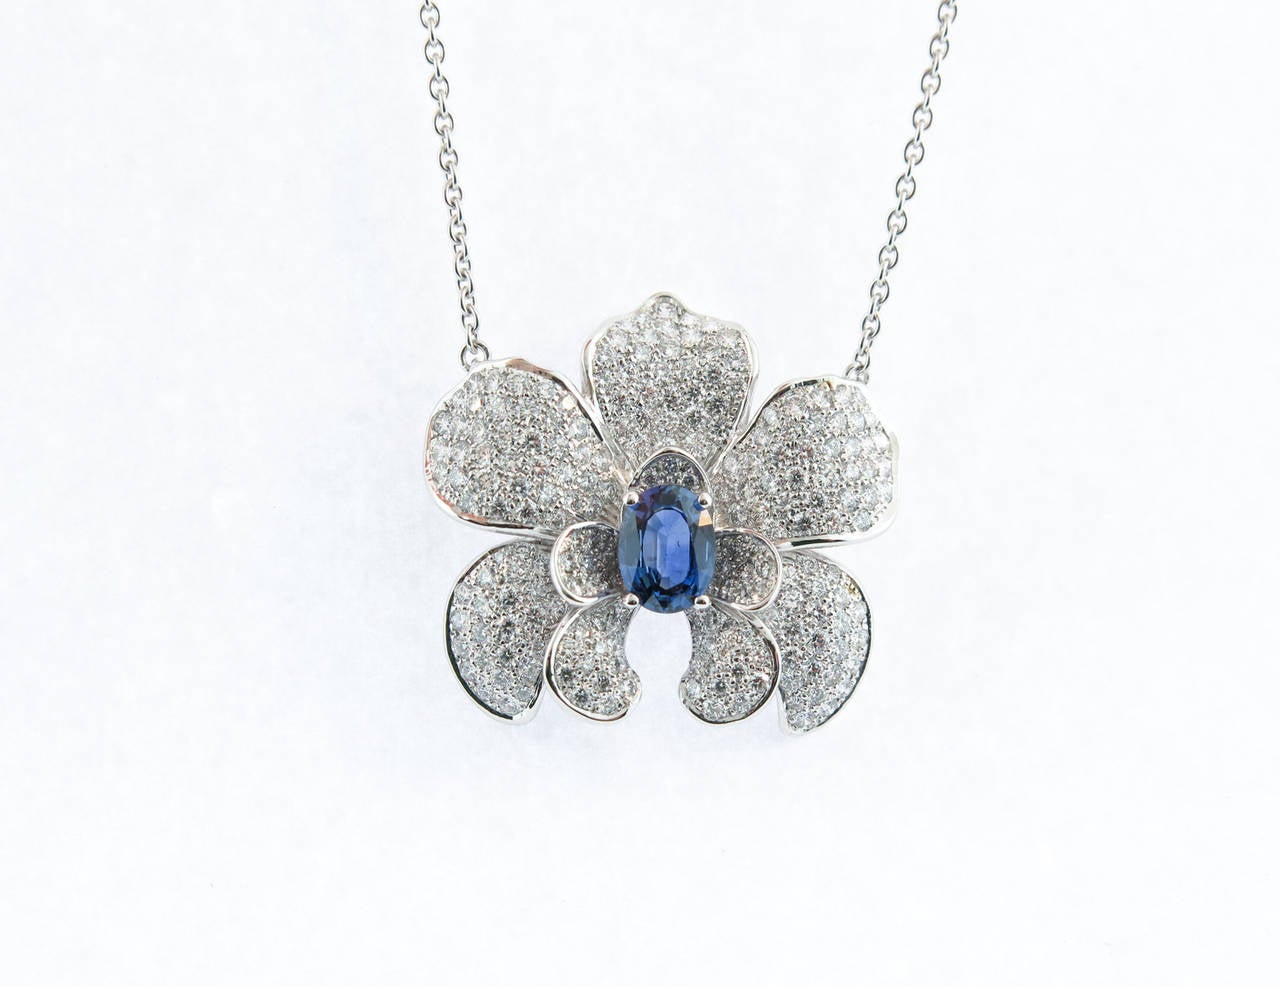 A world where creativity, inspiration, and innovation join luxury and elegance. This impressive Orchid pendant represents the extraordinary beauty of the Fine Jewelry by Carrera y Carrera. Handcrafted in 18k white gold, fine diamonds and sapphire.